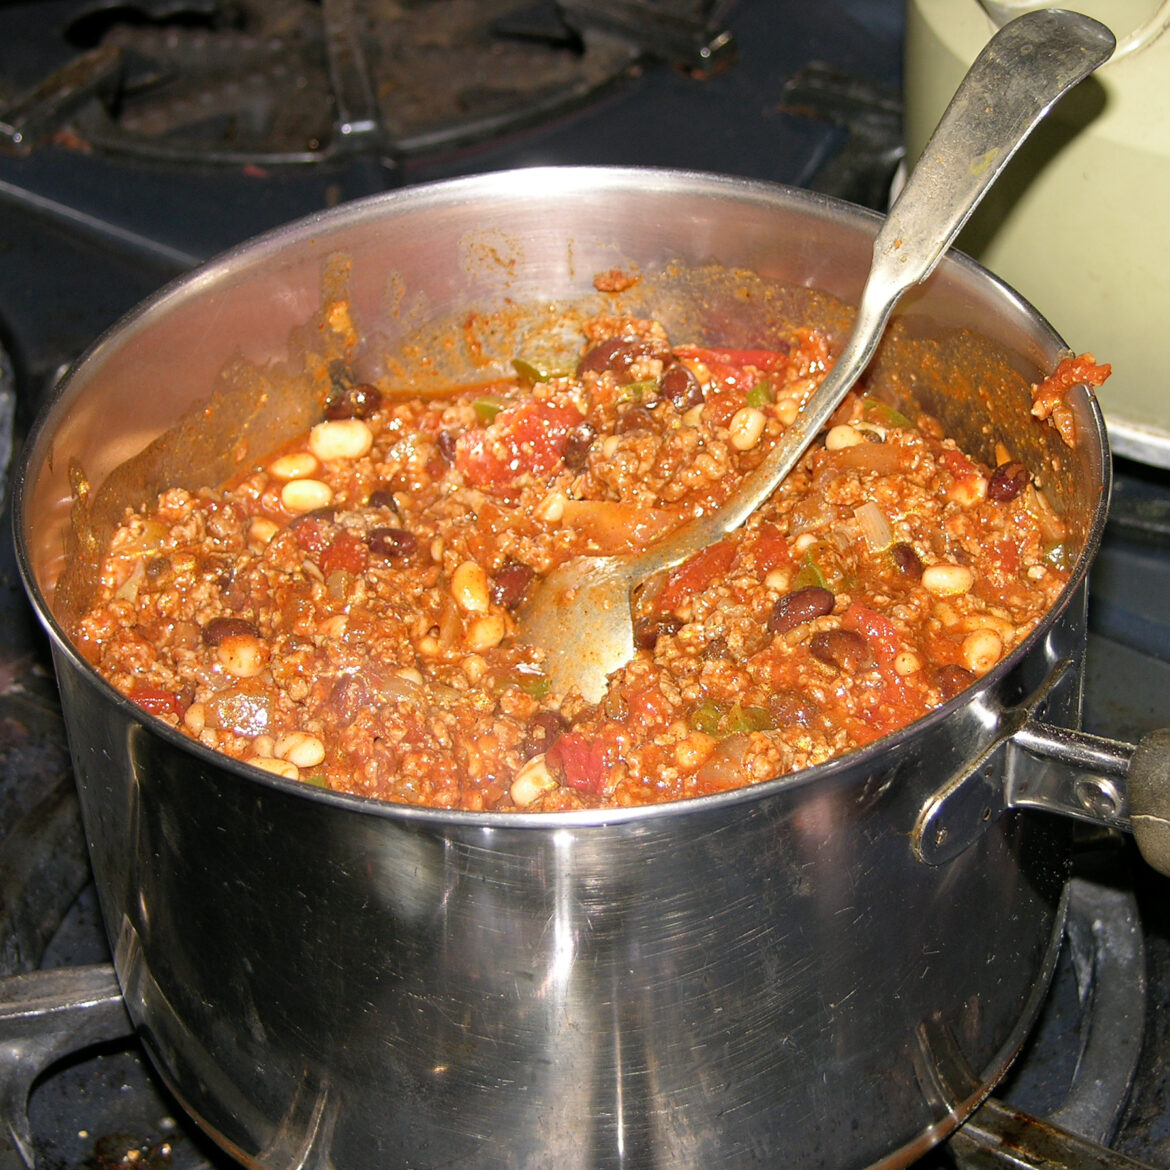 Perry Township Kiwanis postpones sixth annual chili cook-off